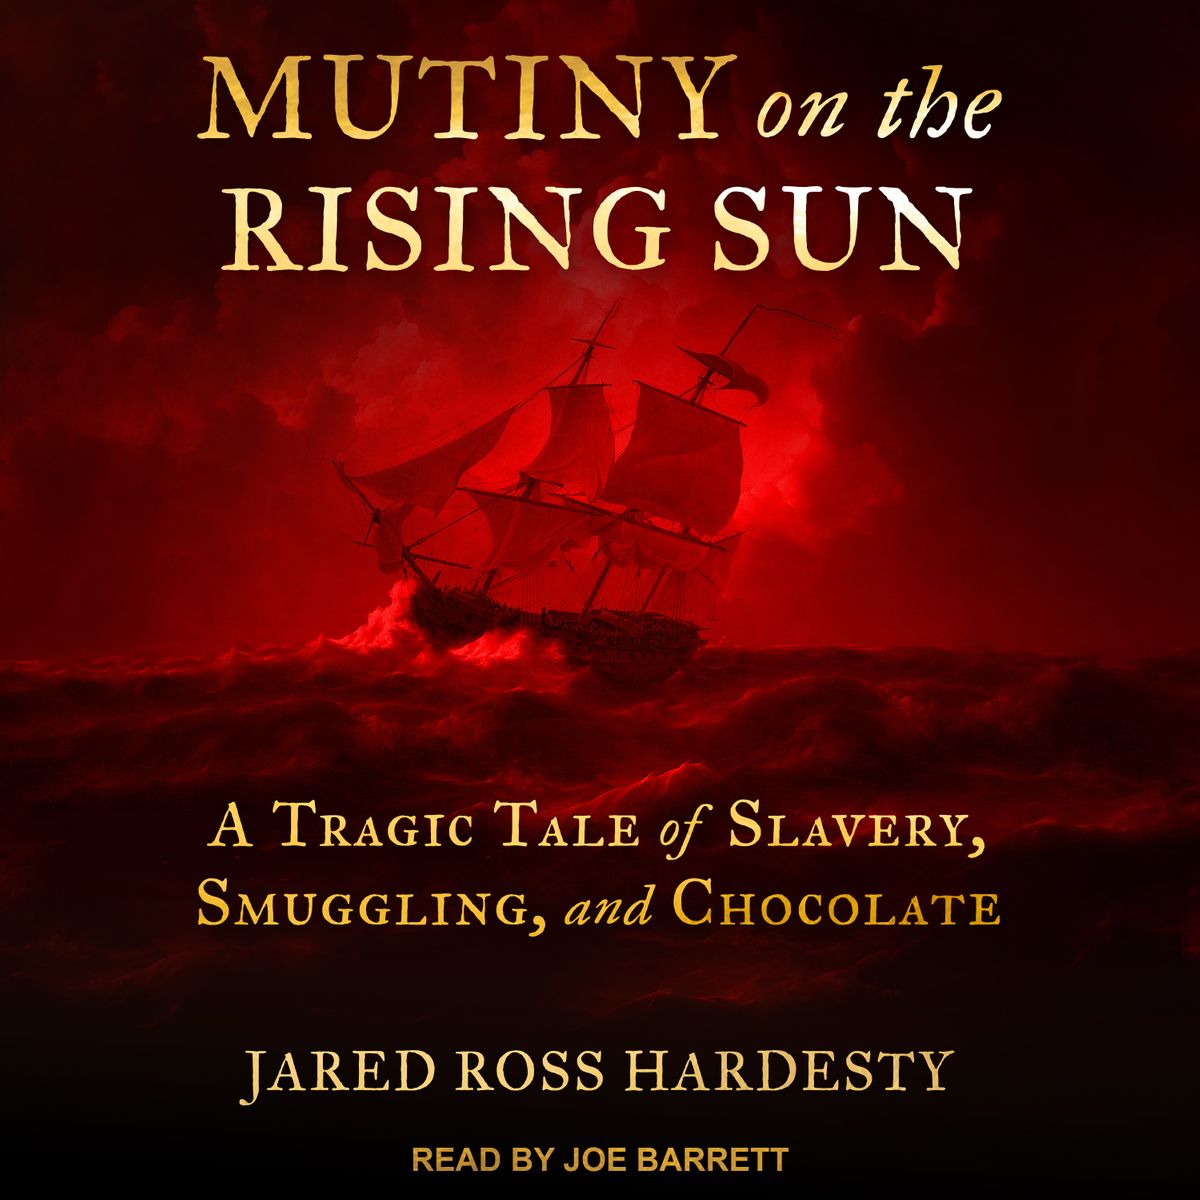 Book cover shows a brig under full sail under a red moon